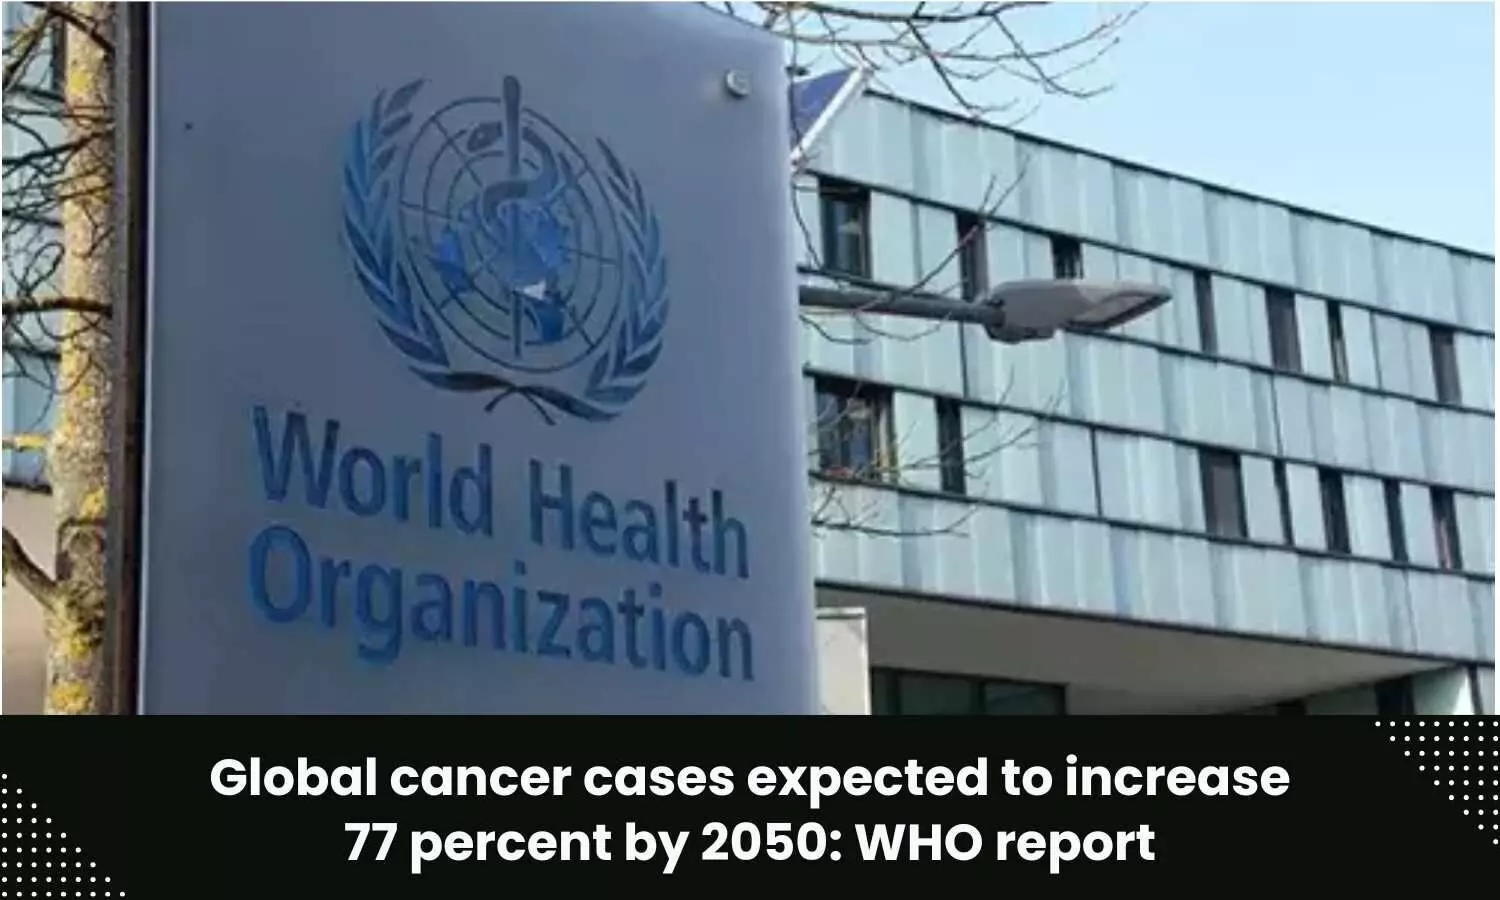 Global cancer cases expected to rise 77 percent by 2050, says WHO report